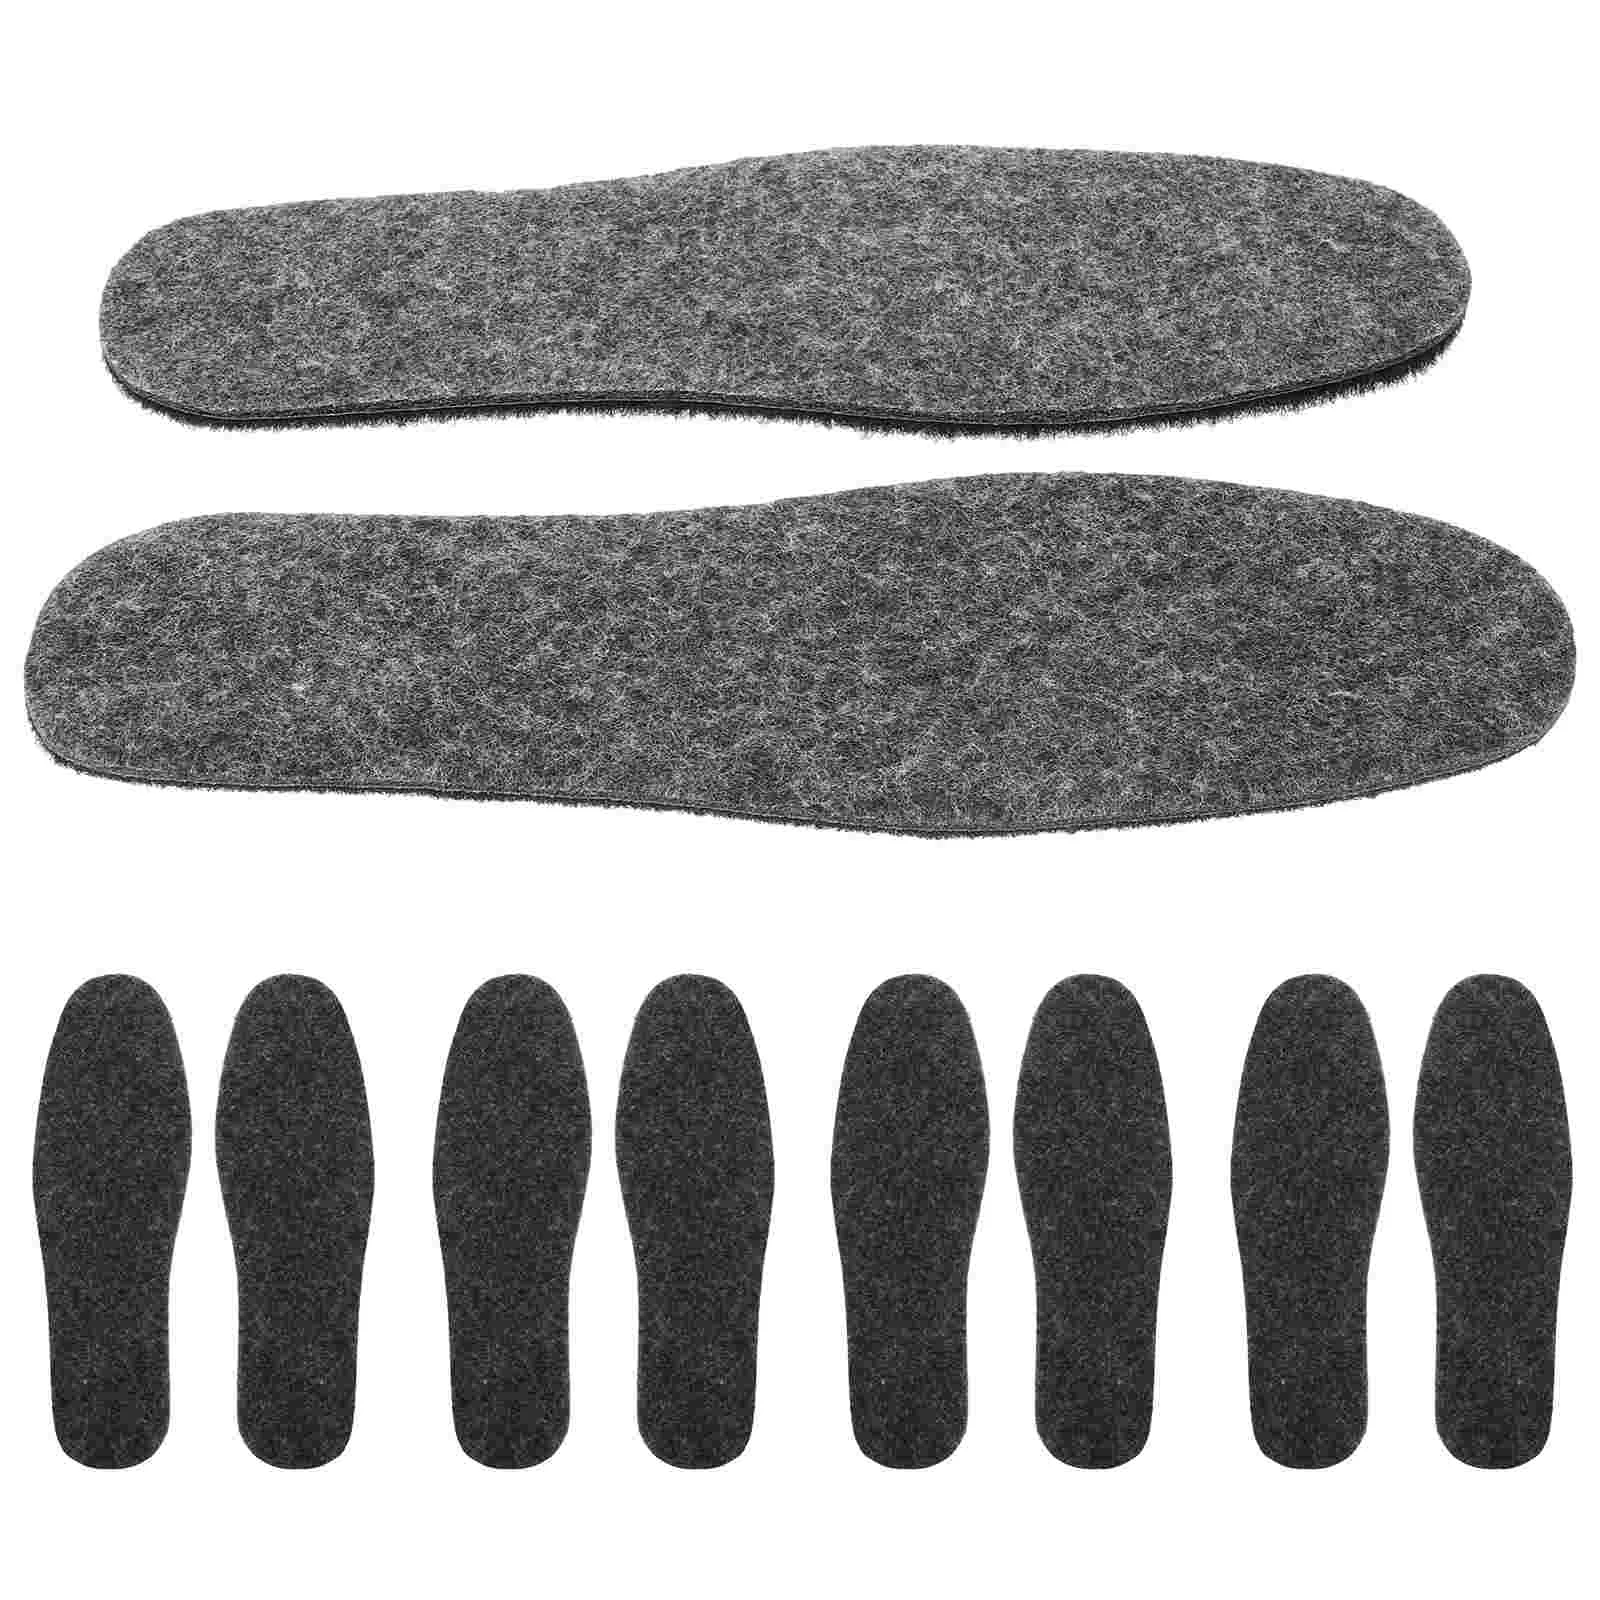 

5 Pairs of Felt Warm Insoles Sneakers Insoles Winter Boots Insole Shoe Inner Pads